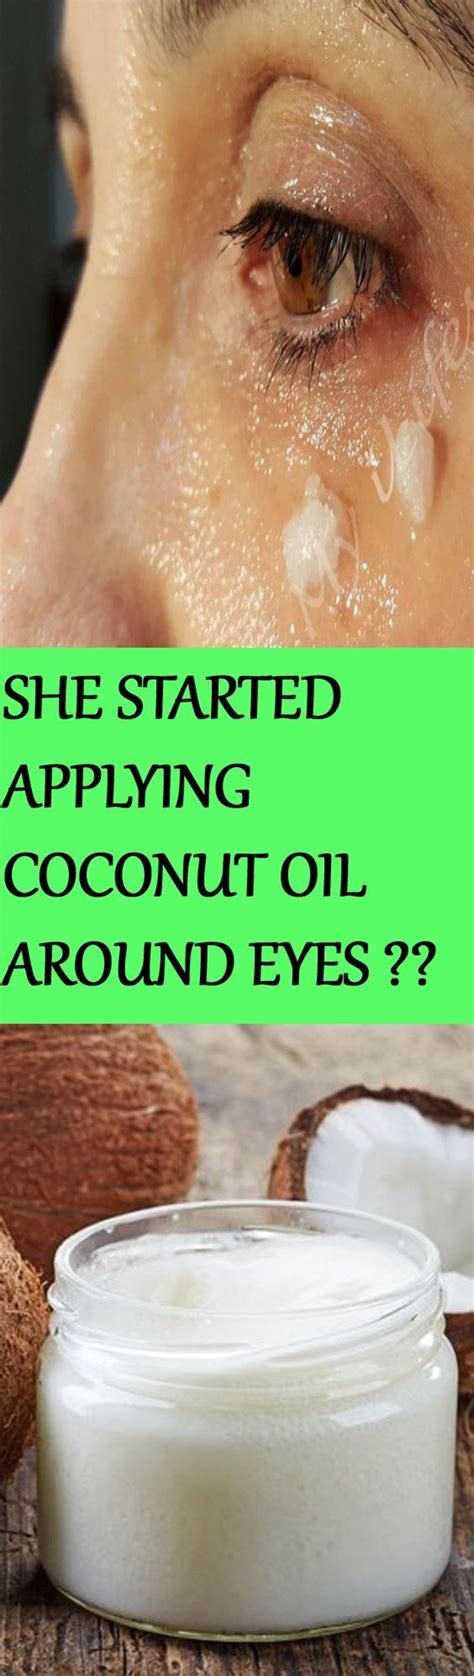 she started applying coconut oil around her eyes 5 minutes later… unbelievable apply coconut